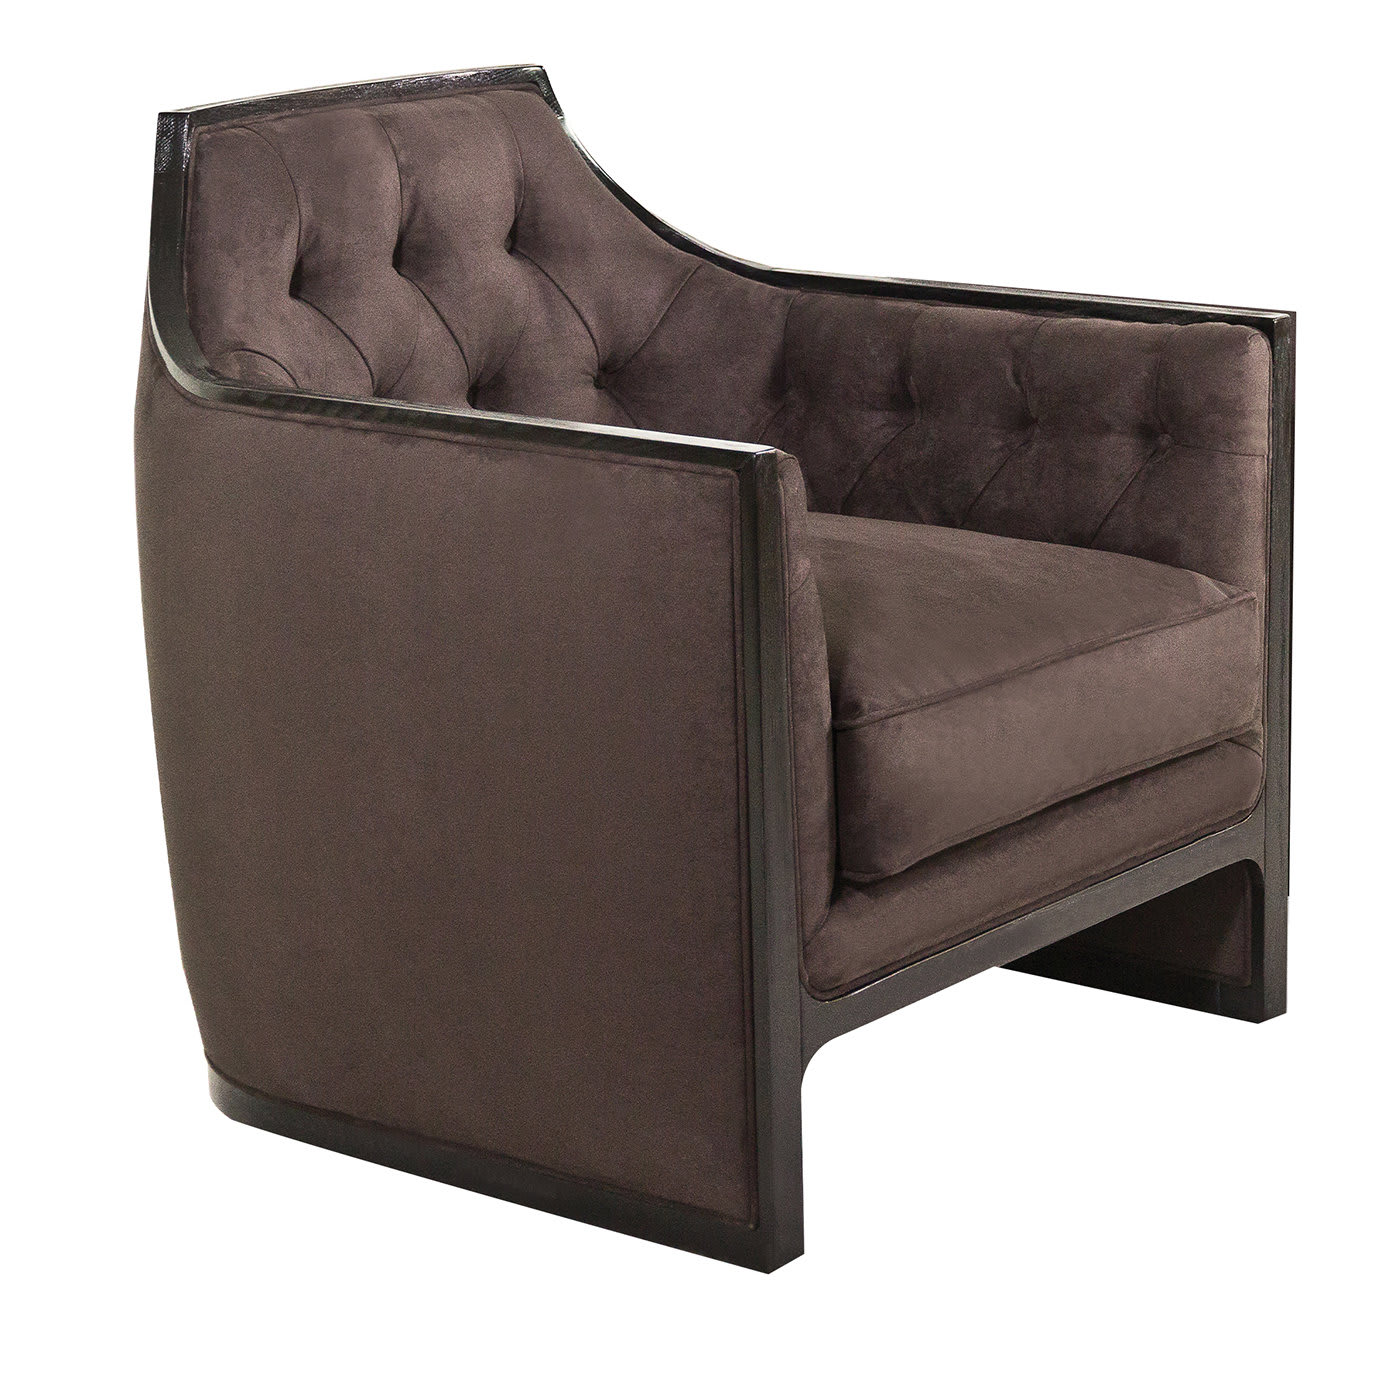 Compact Tufted Tobacco Armchair - Palmobili